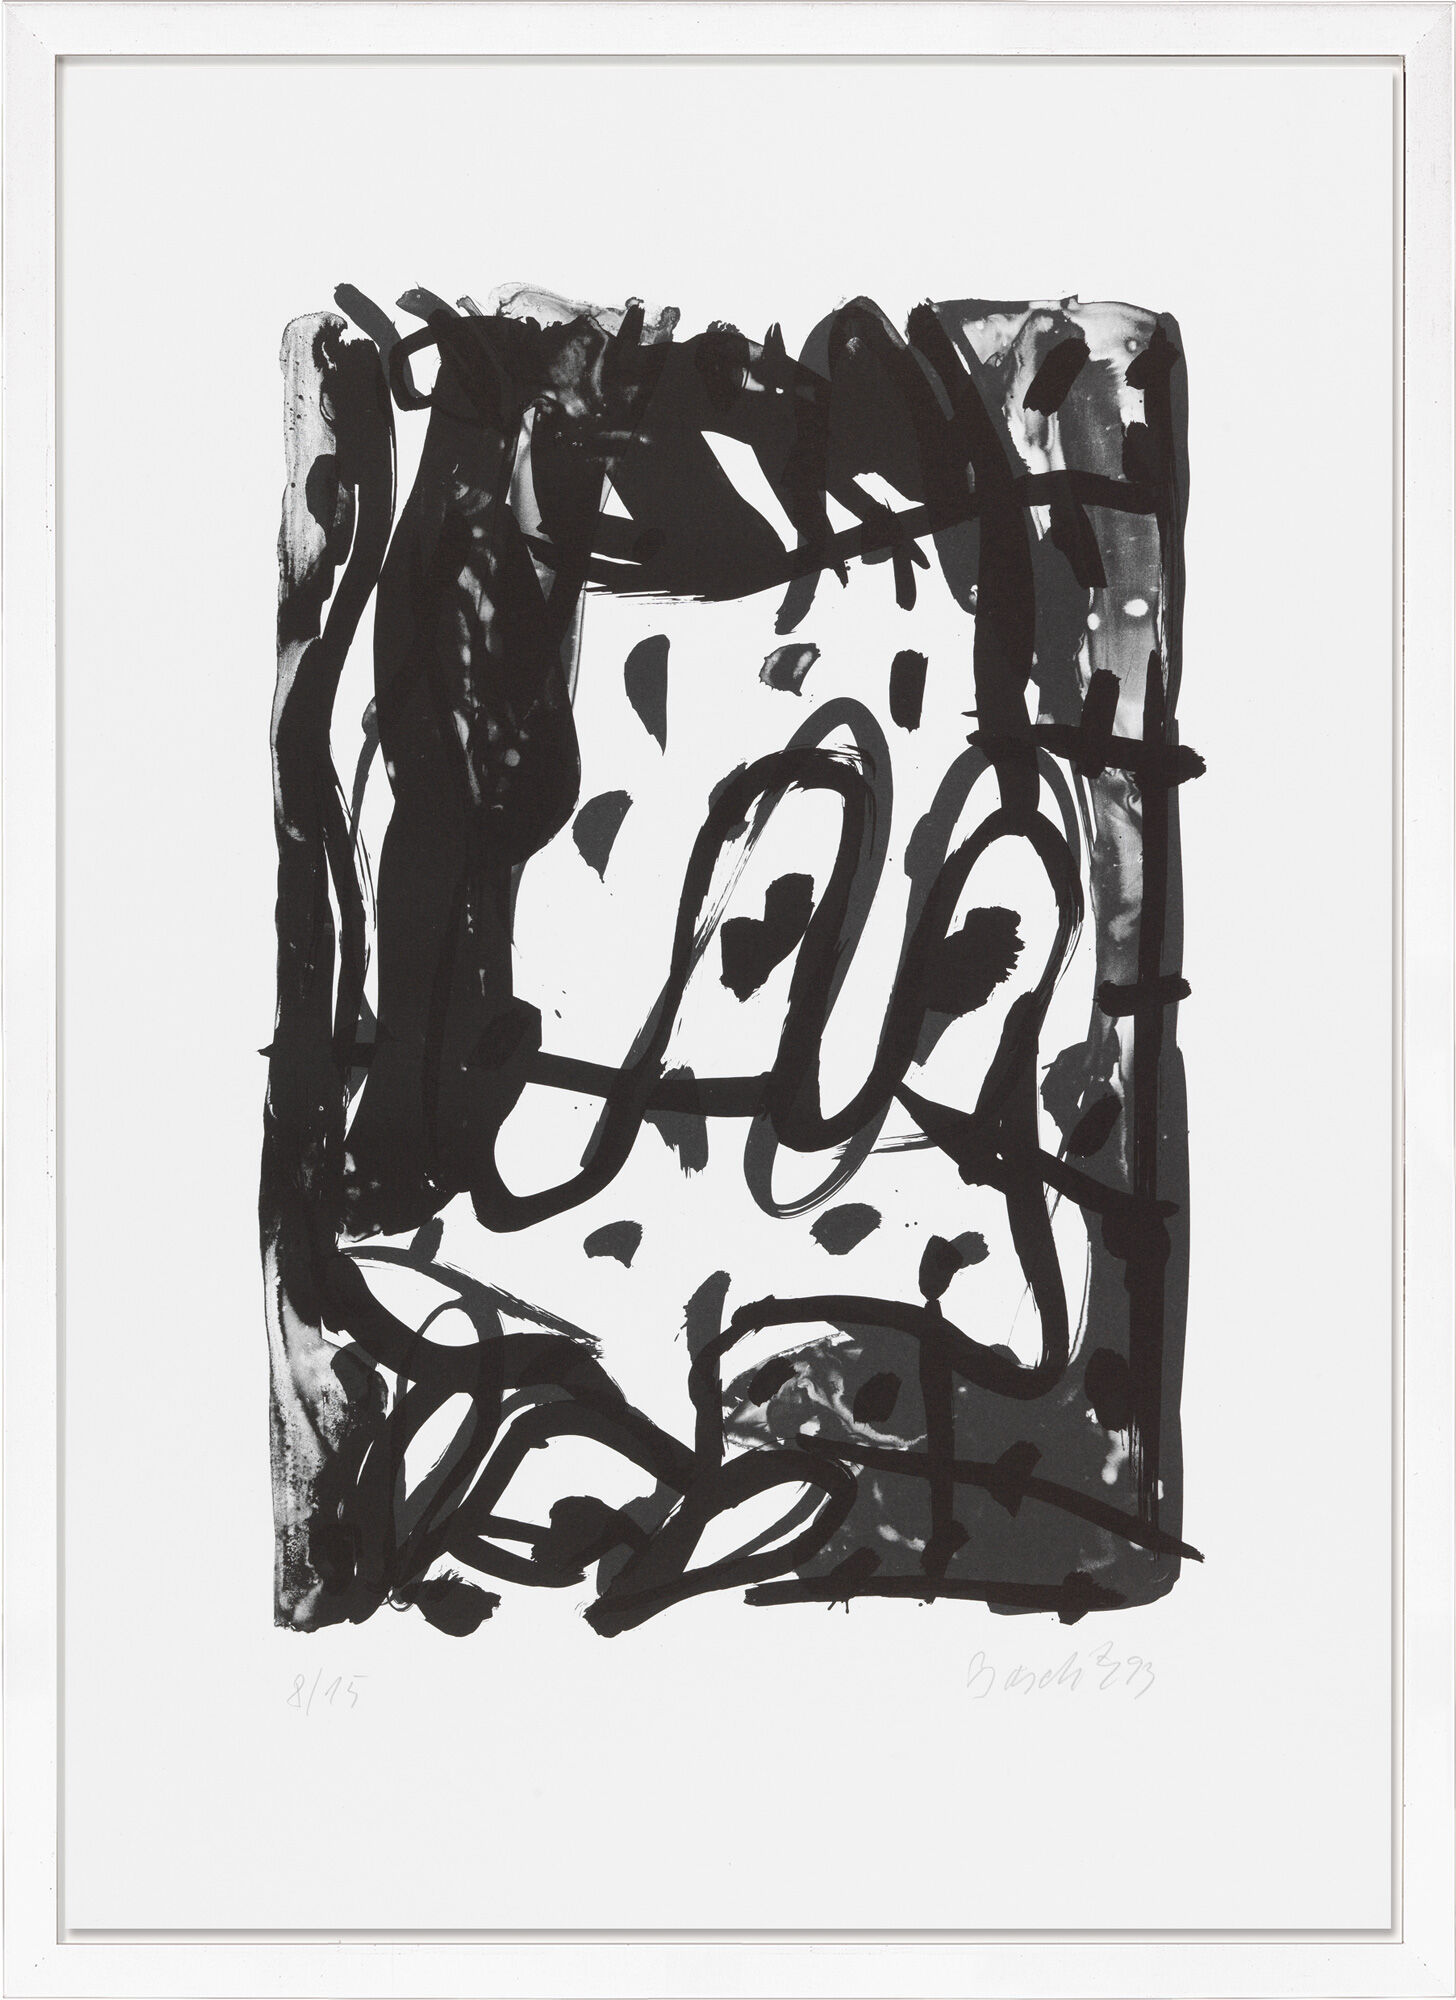 Picture "Base" (1993) by Georg Baselitz